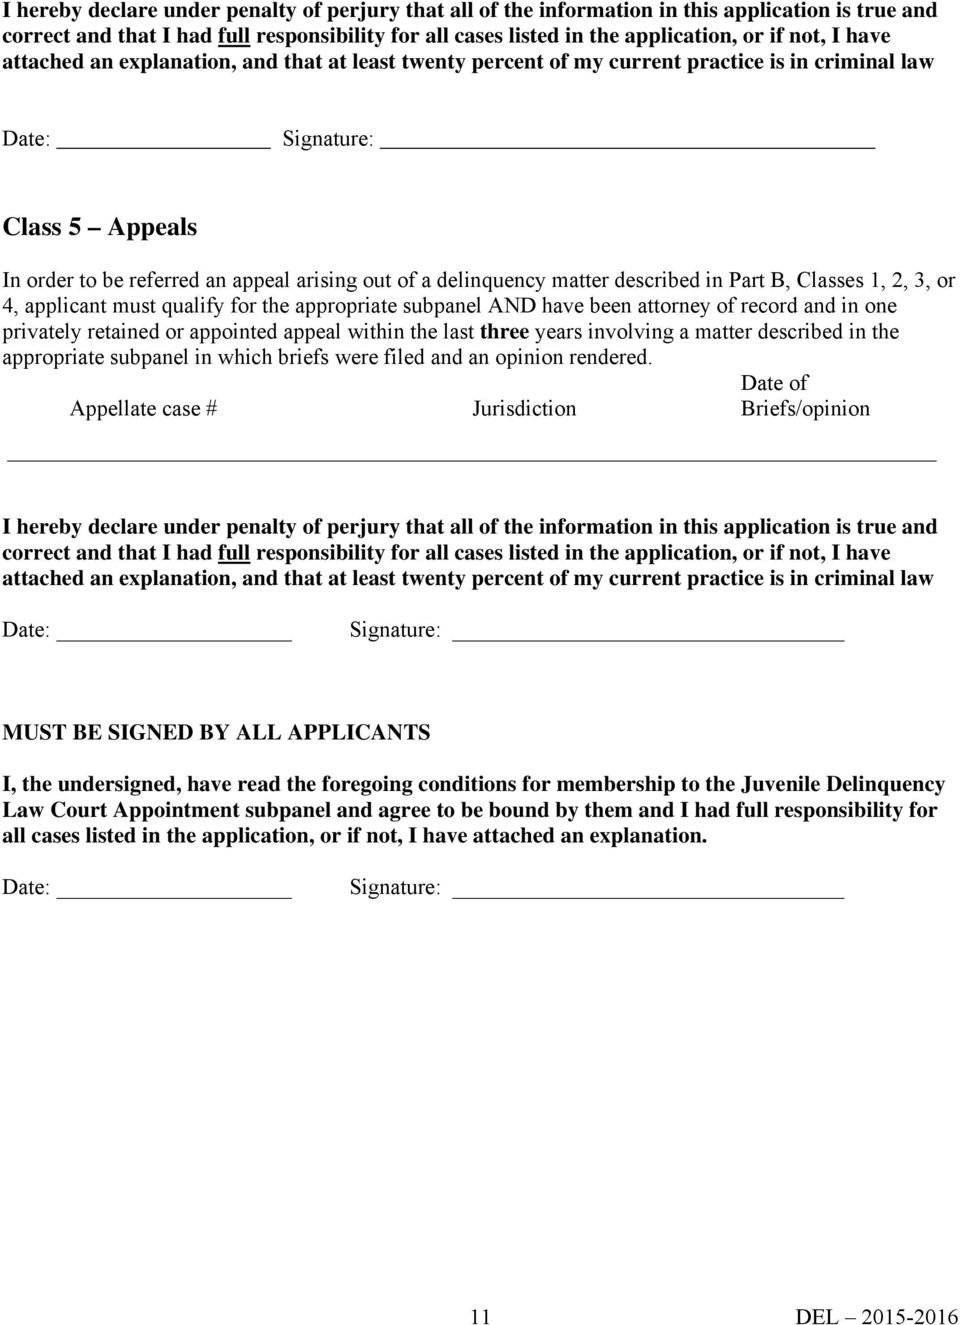 delinquency matter described in Part B, Classes 1, 2, 3, or 4, applicant must qualify for the appropriate subpanel AND have been attorney of record and in one privately retained or appointed appeal